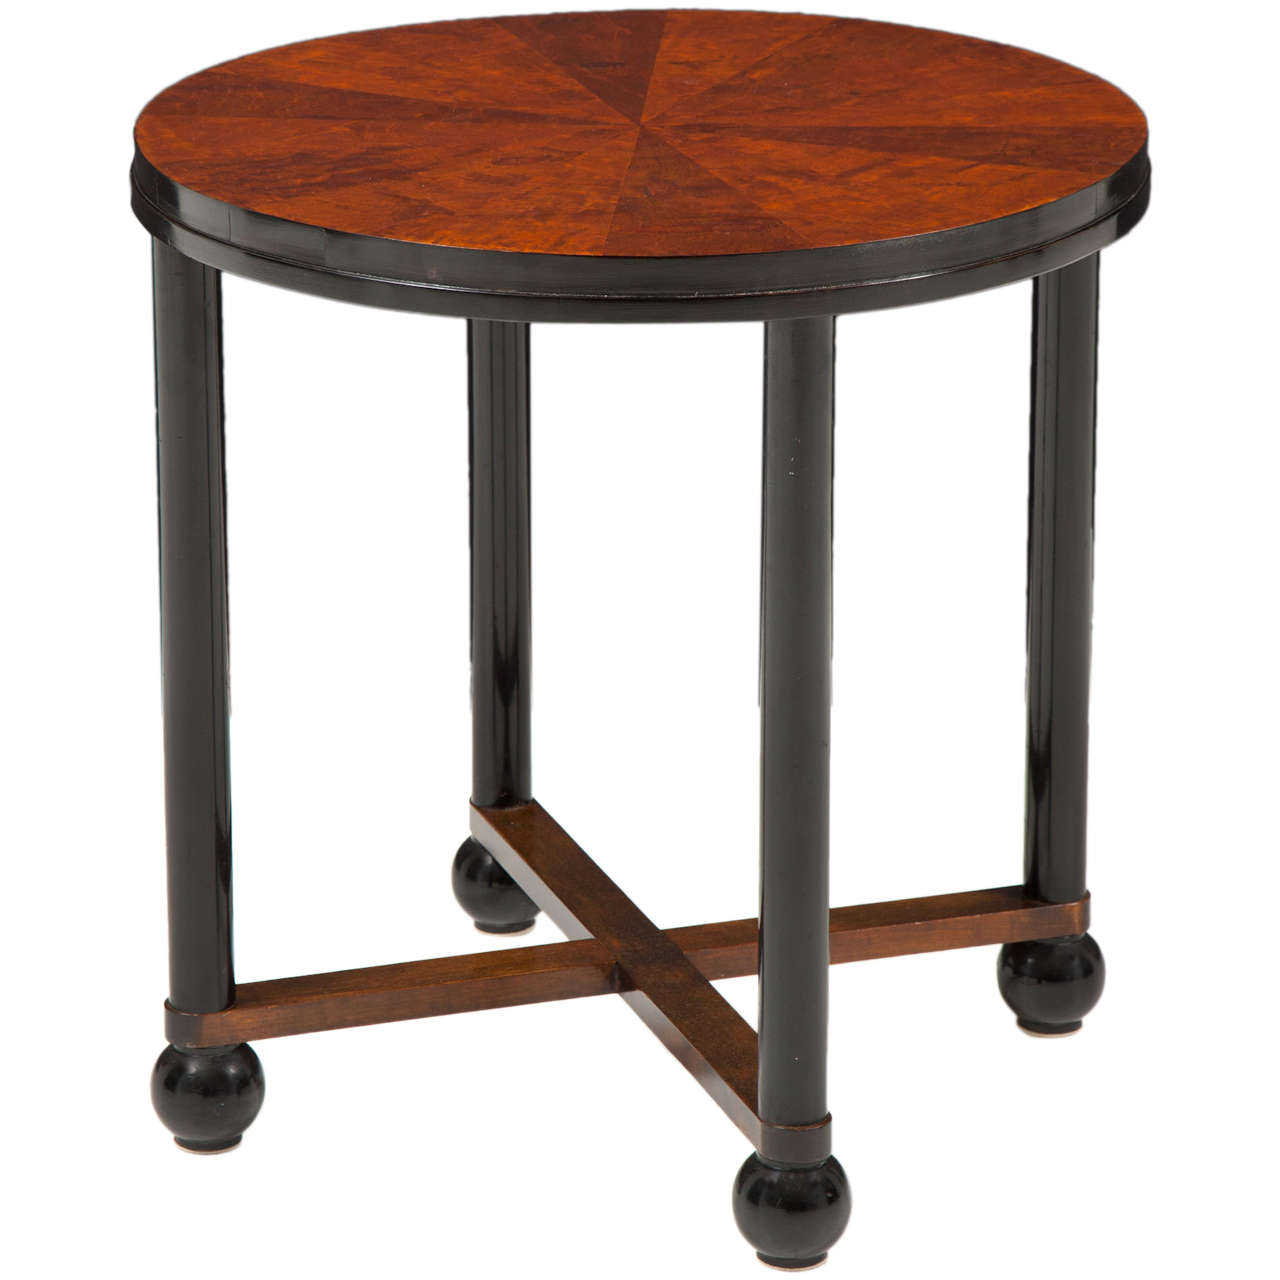 Swedish Grace Period Side Table